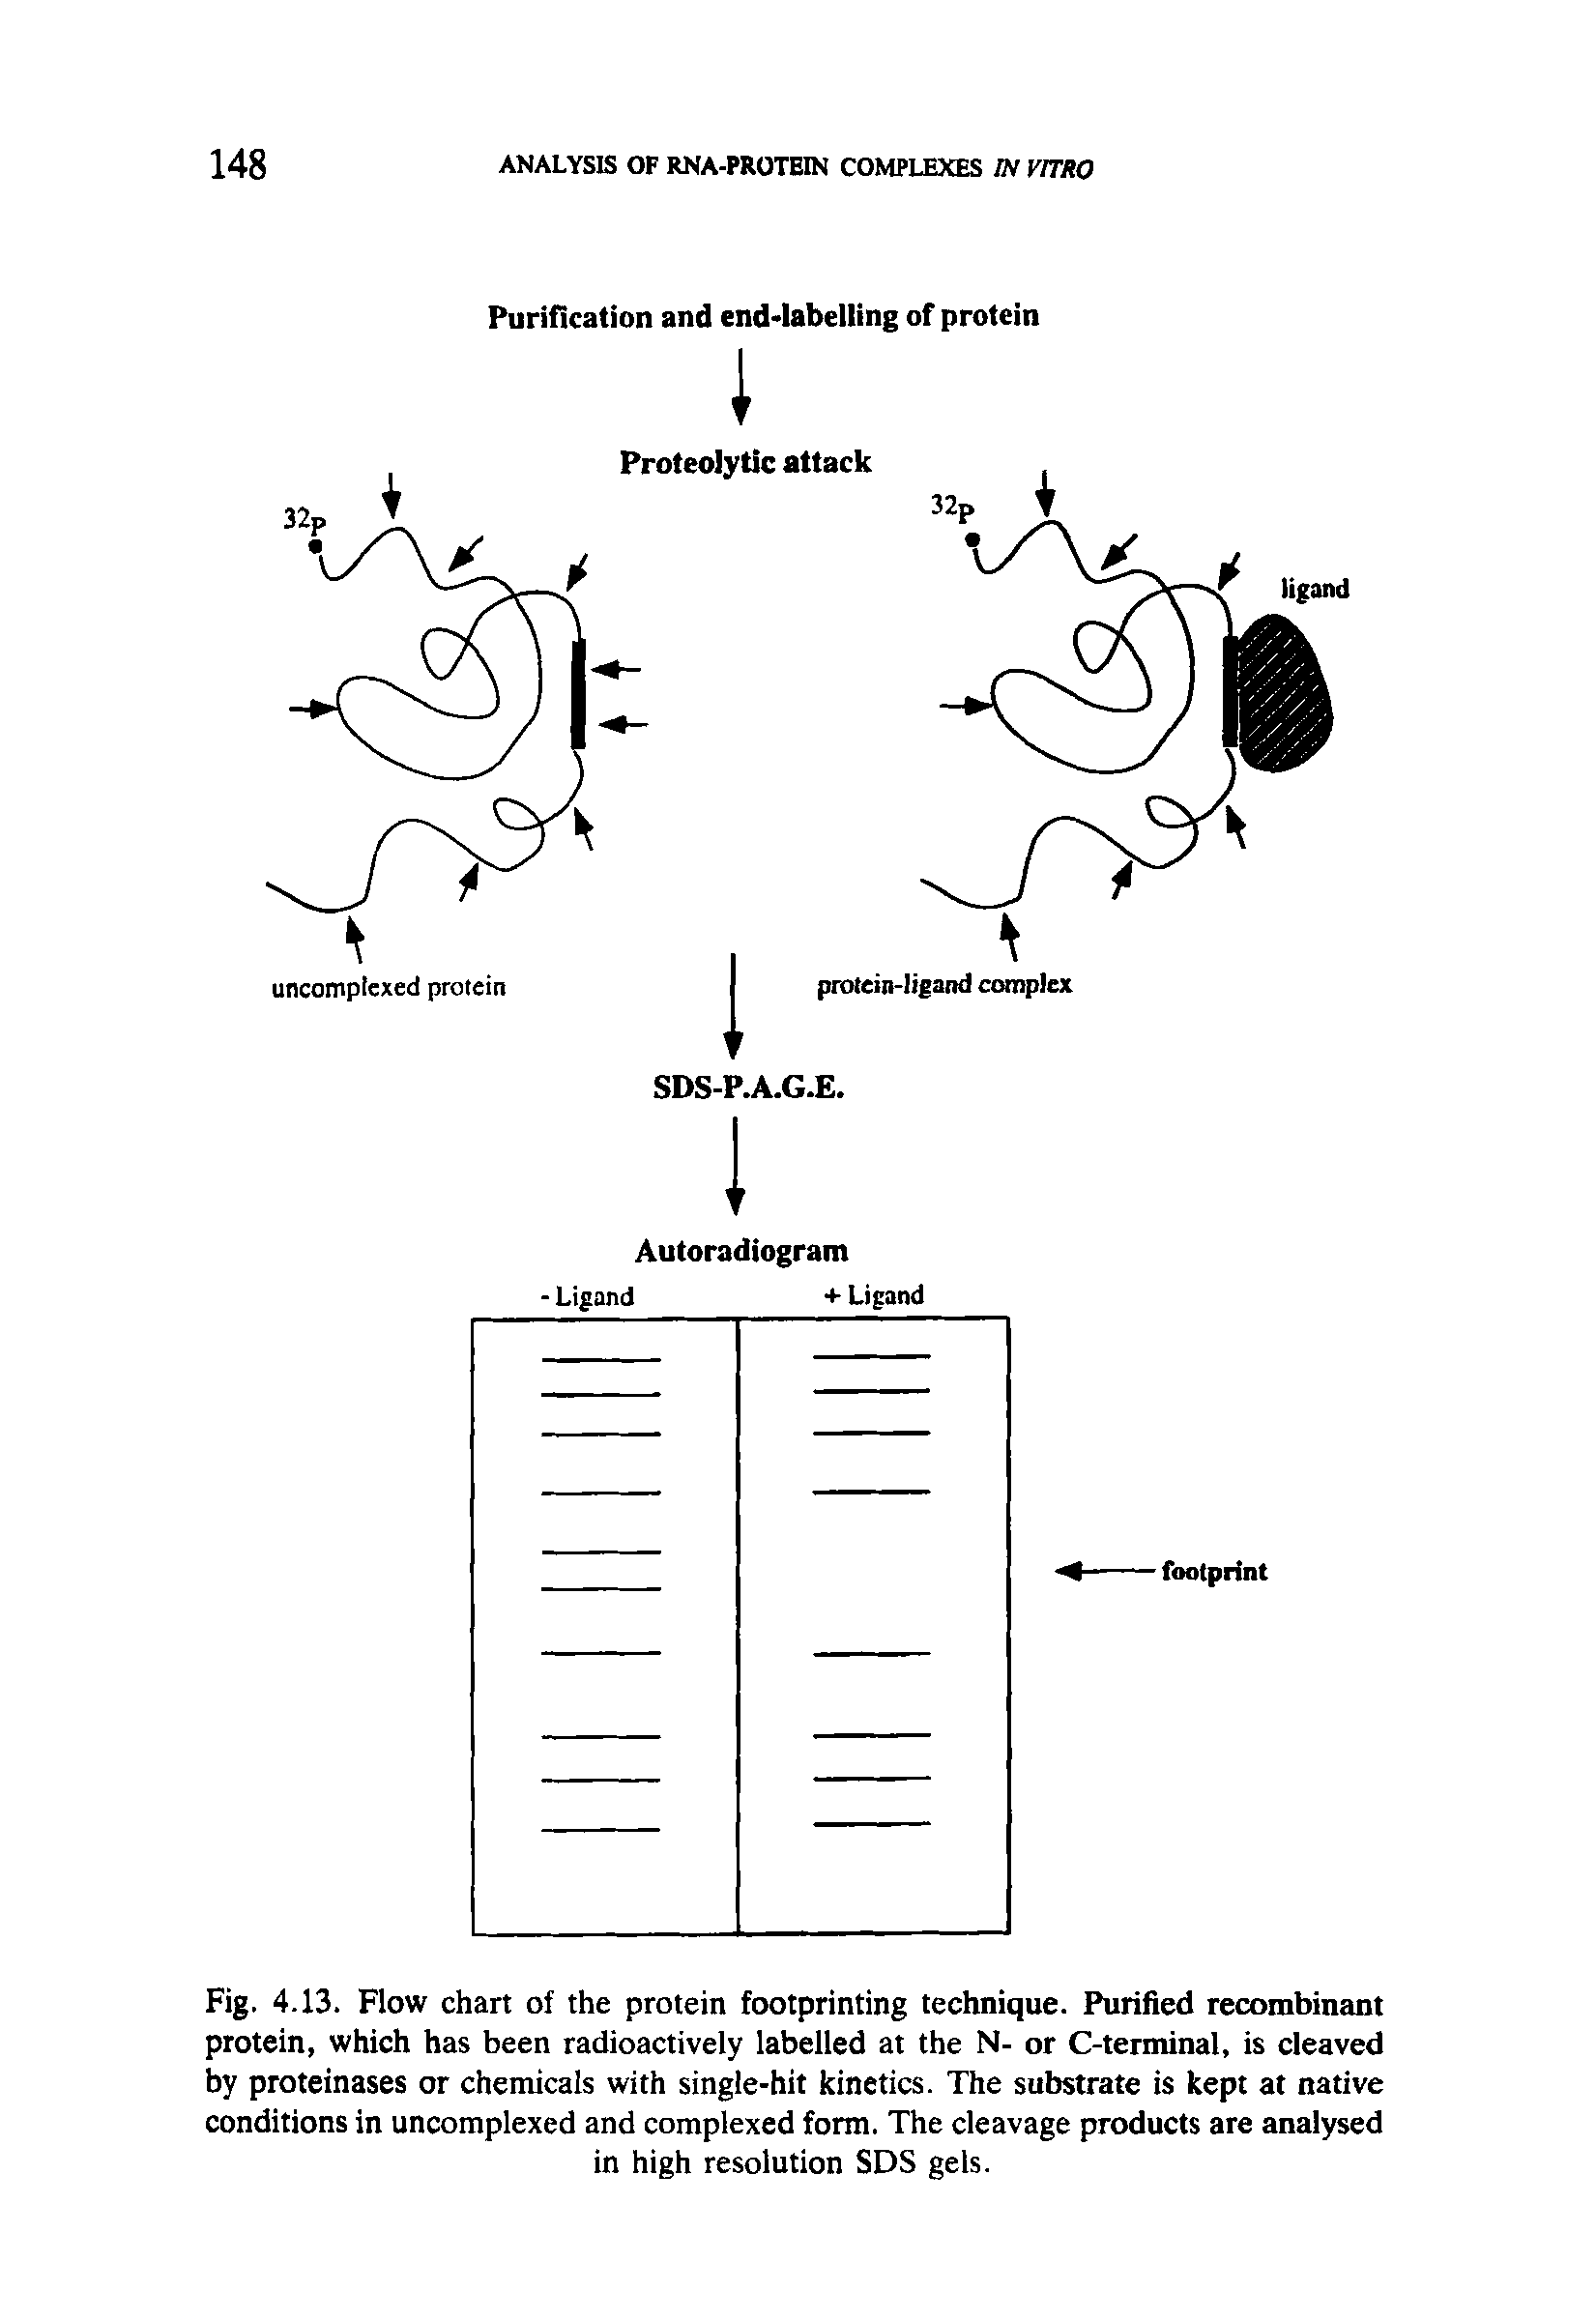 Fig. 4.13. Flow chart of the protein footprinting technique. Purified recombinant protein, which has been radioactively labelled at the N- or C-terminal, is cleaved by proteinases or chemicals with single-hit kinetics. The substrate is kept at native conditions in uncomplexed and complexed form. The cleavage products are analysed in high resolution SDS gels.